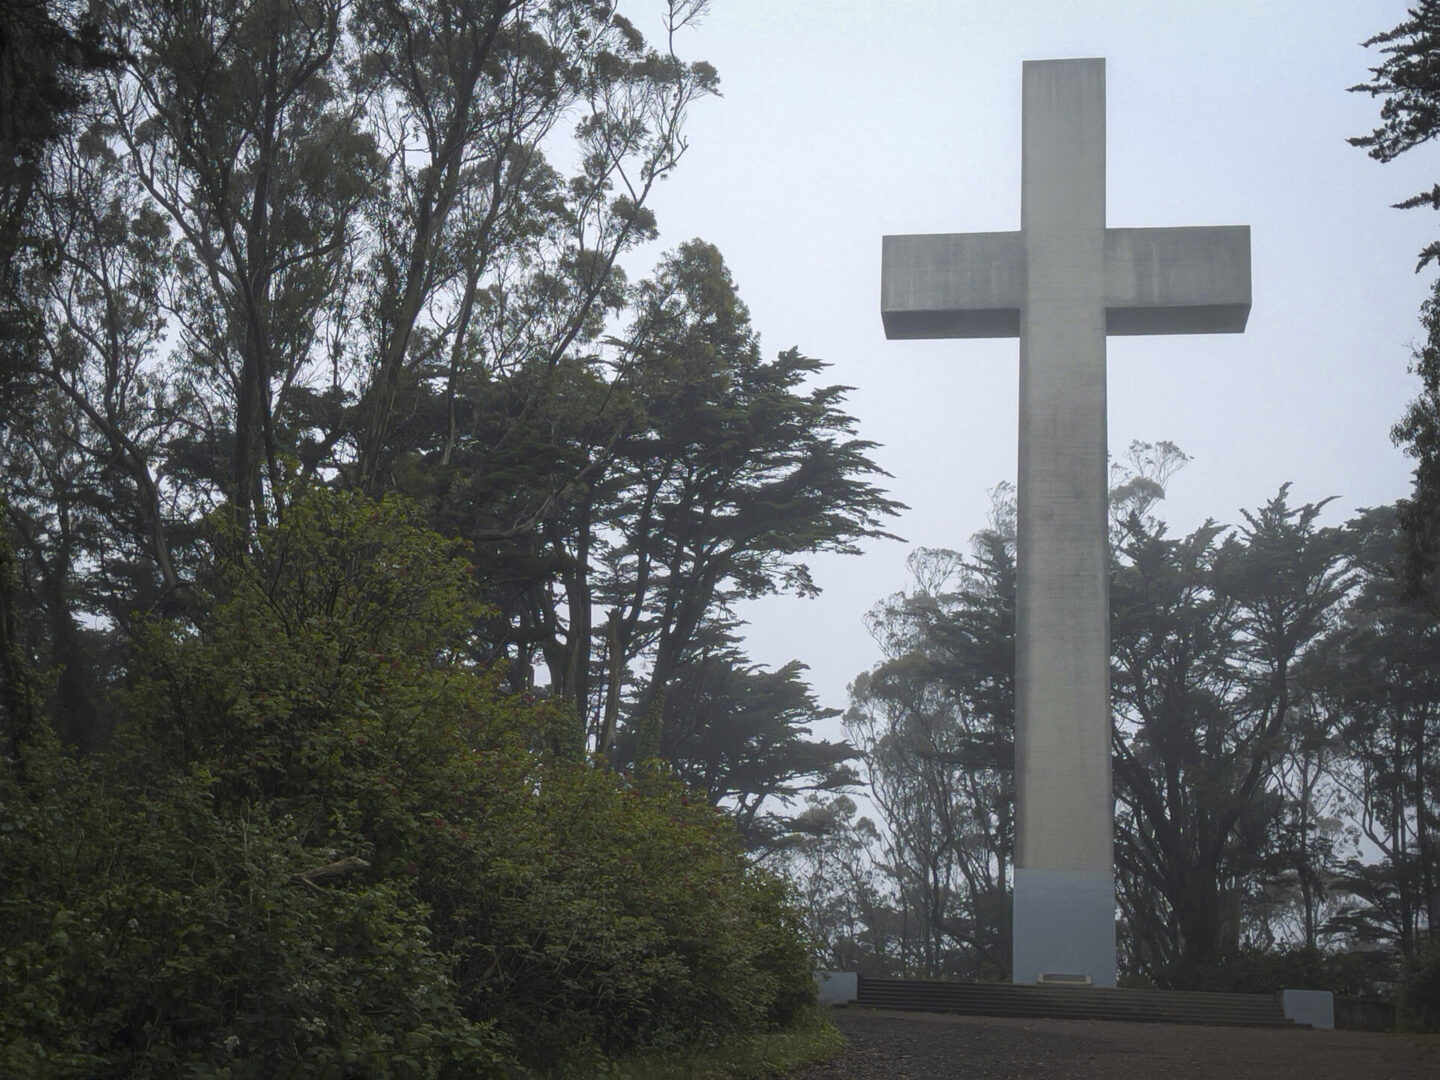 Mt. Davidson Cross at the top of the hill.